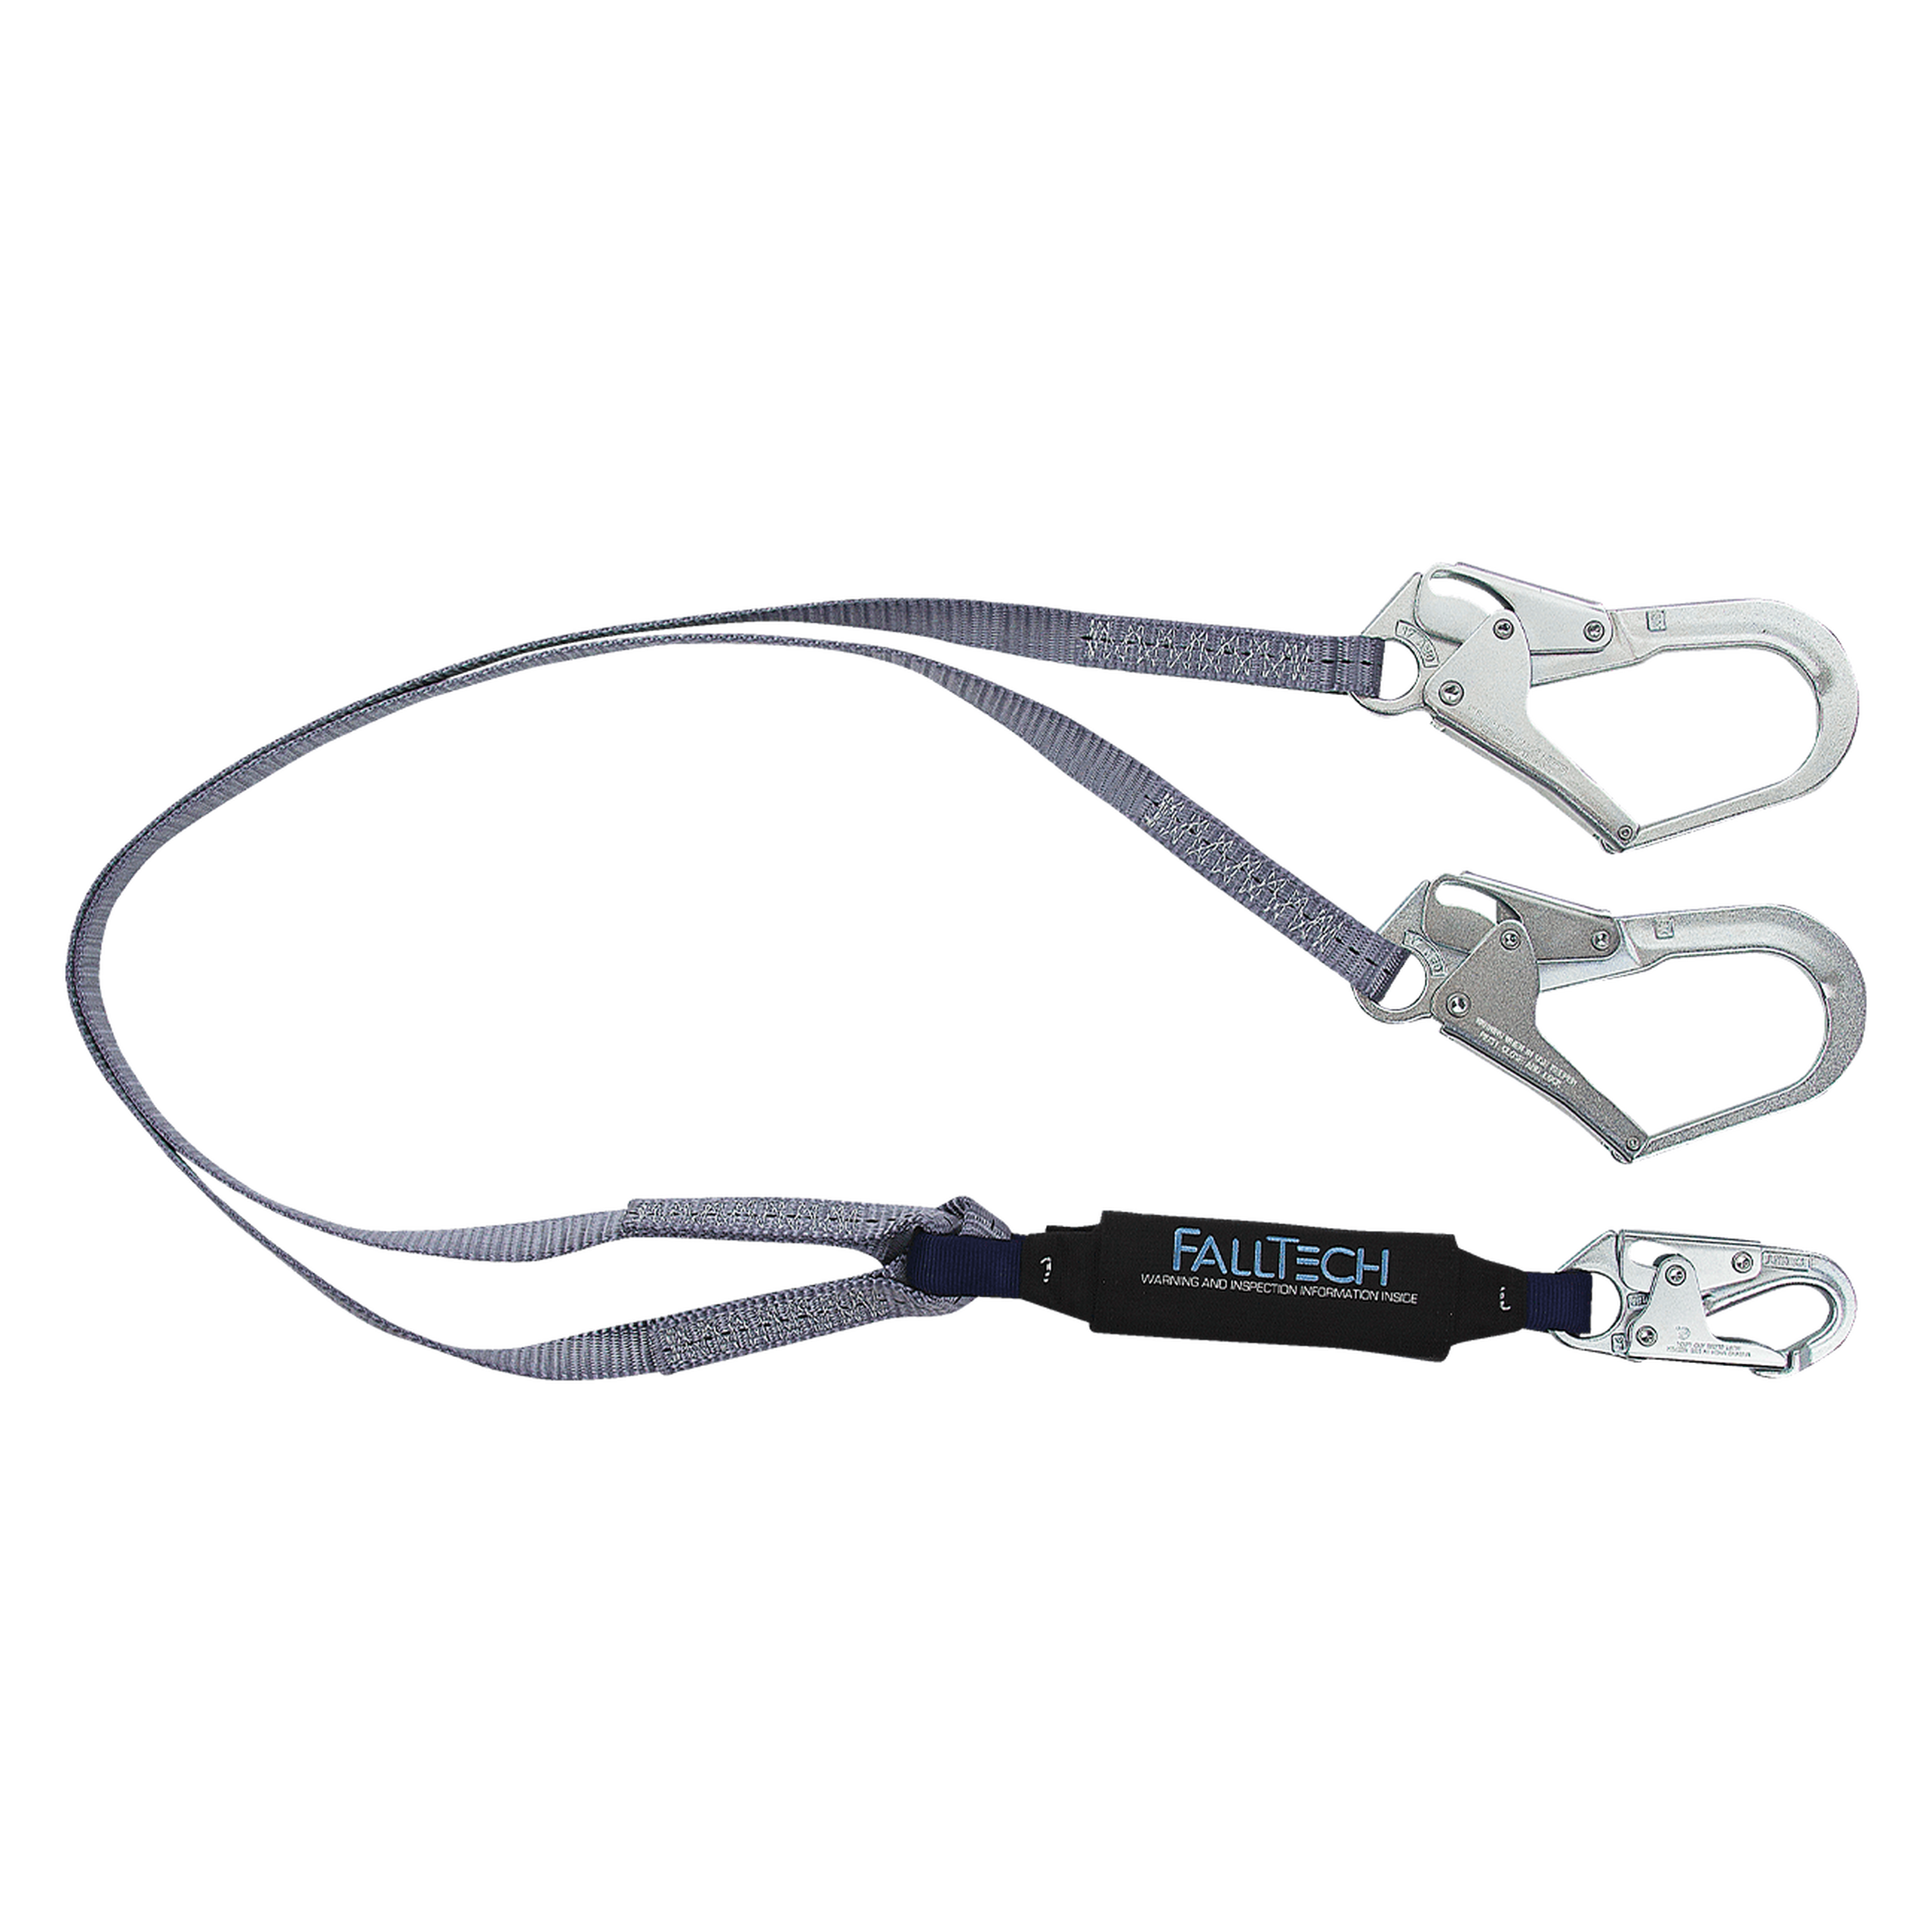 FallTech 826073 6' ViewPack® Energy Absorbing Lanyard, Double-leg with Steel Connectors (each)